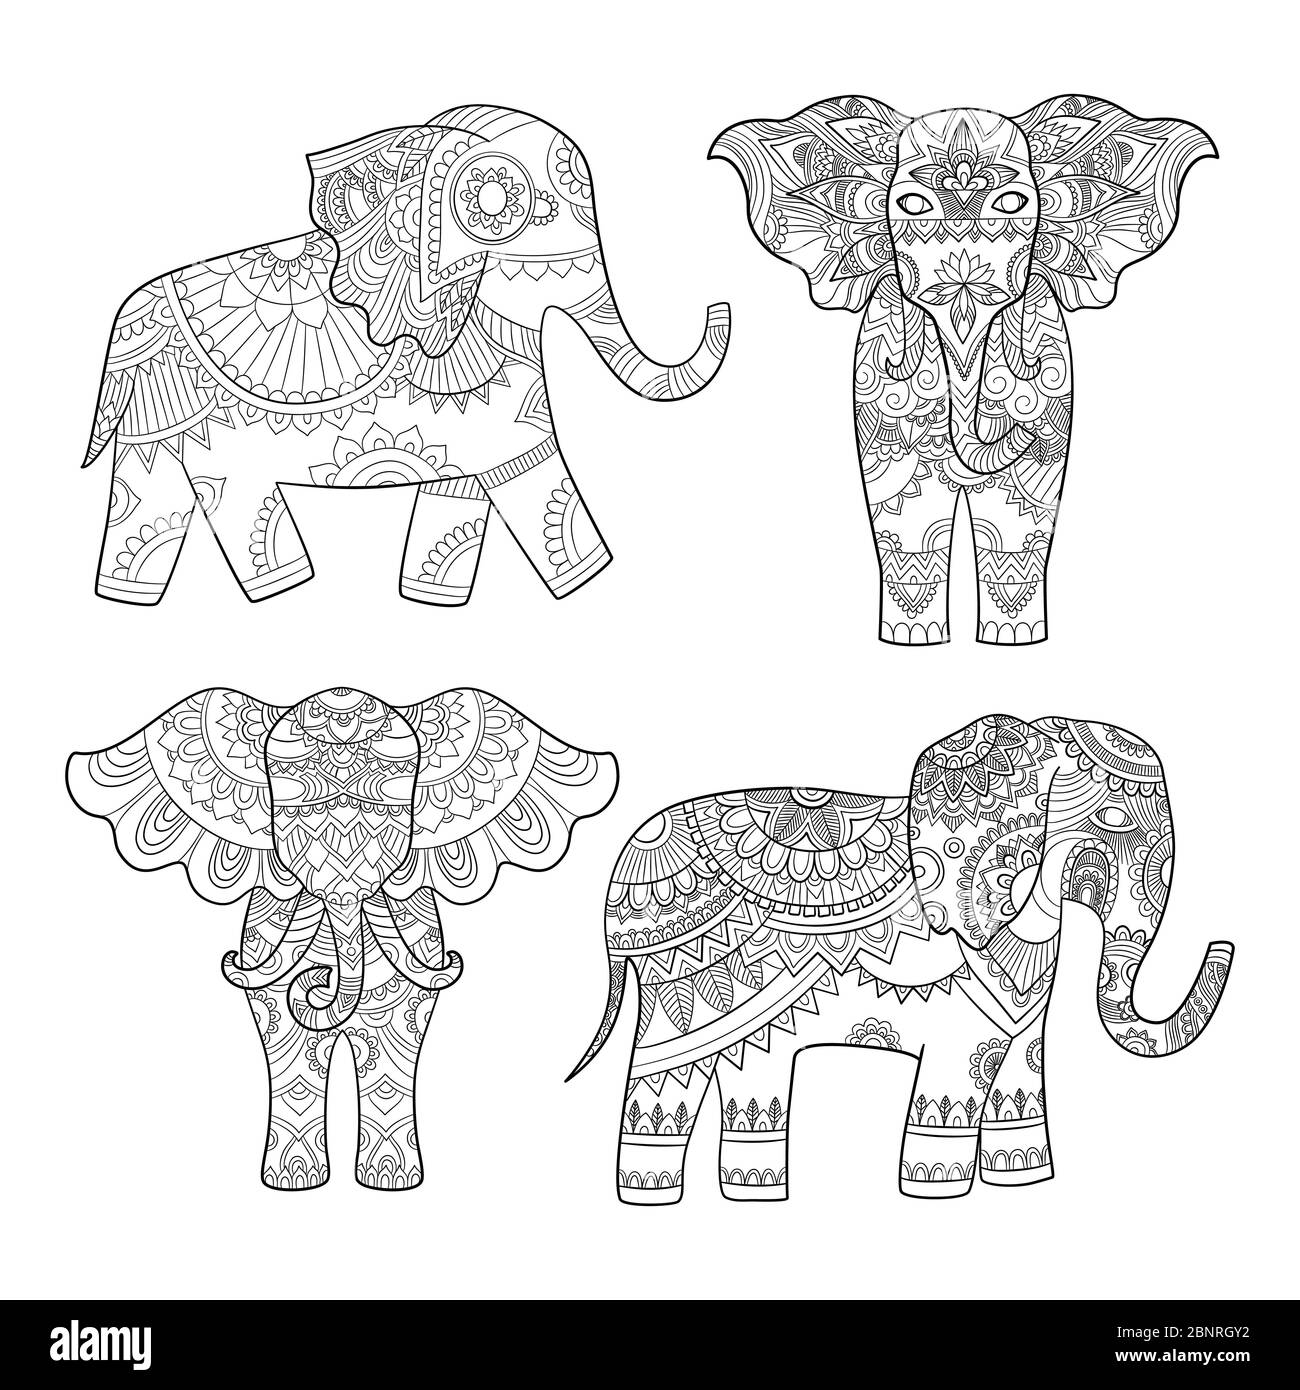 Indian elephant decoration. Animal pattern for adults colored pages vector tribal illustrations Stock Vector